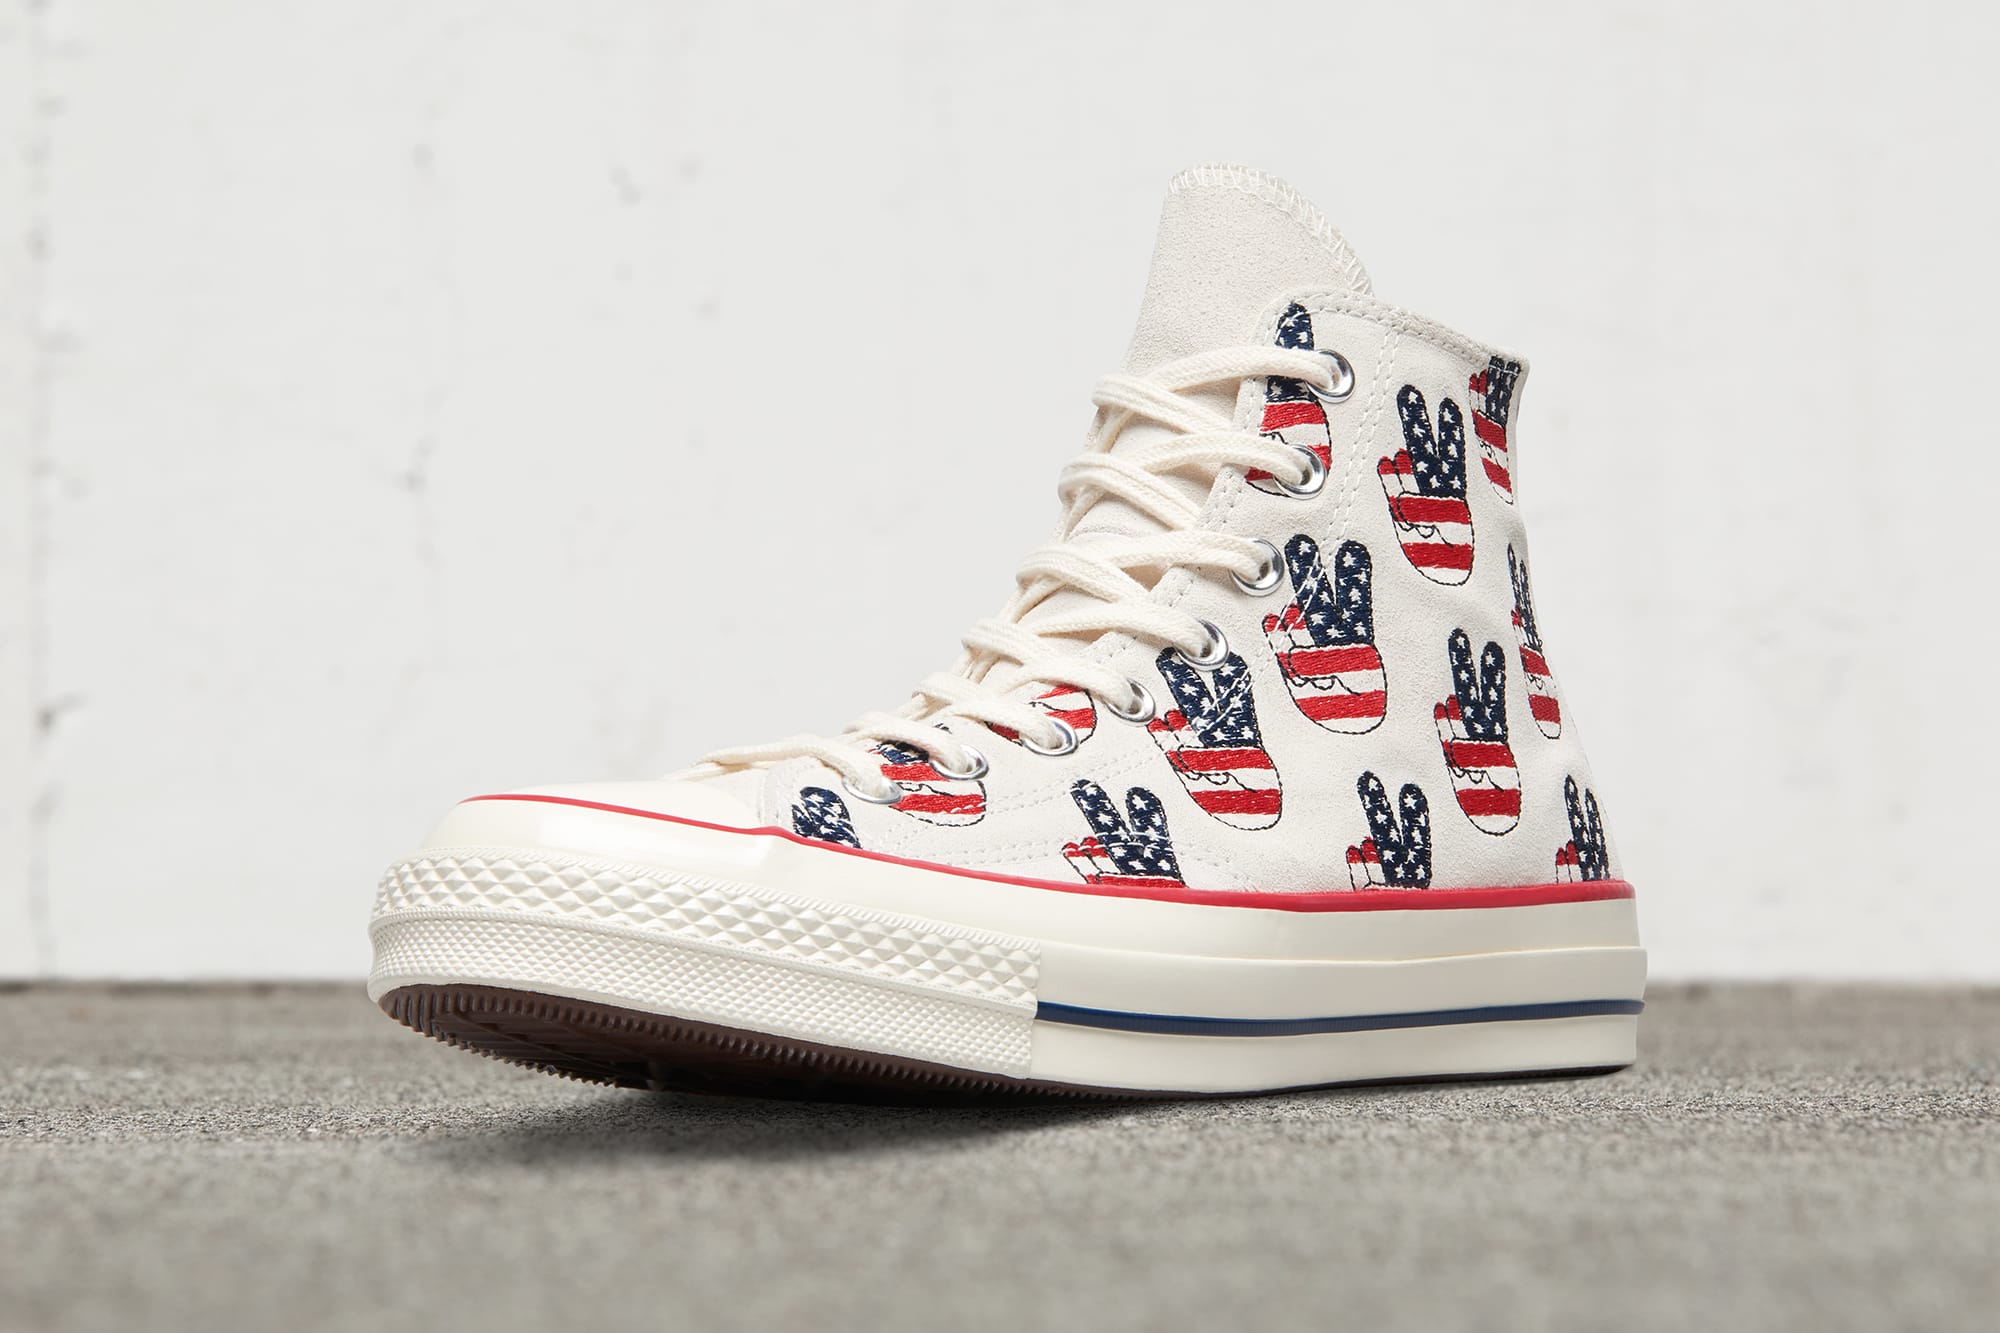 converse all star limited edition 2016